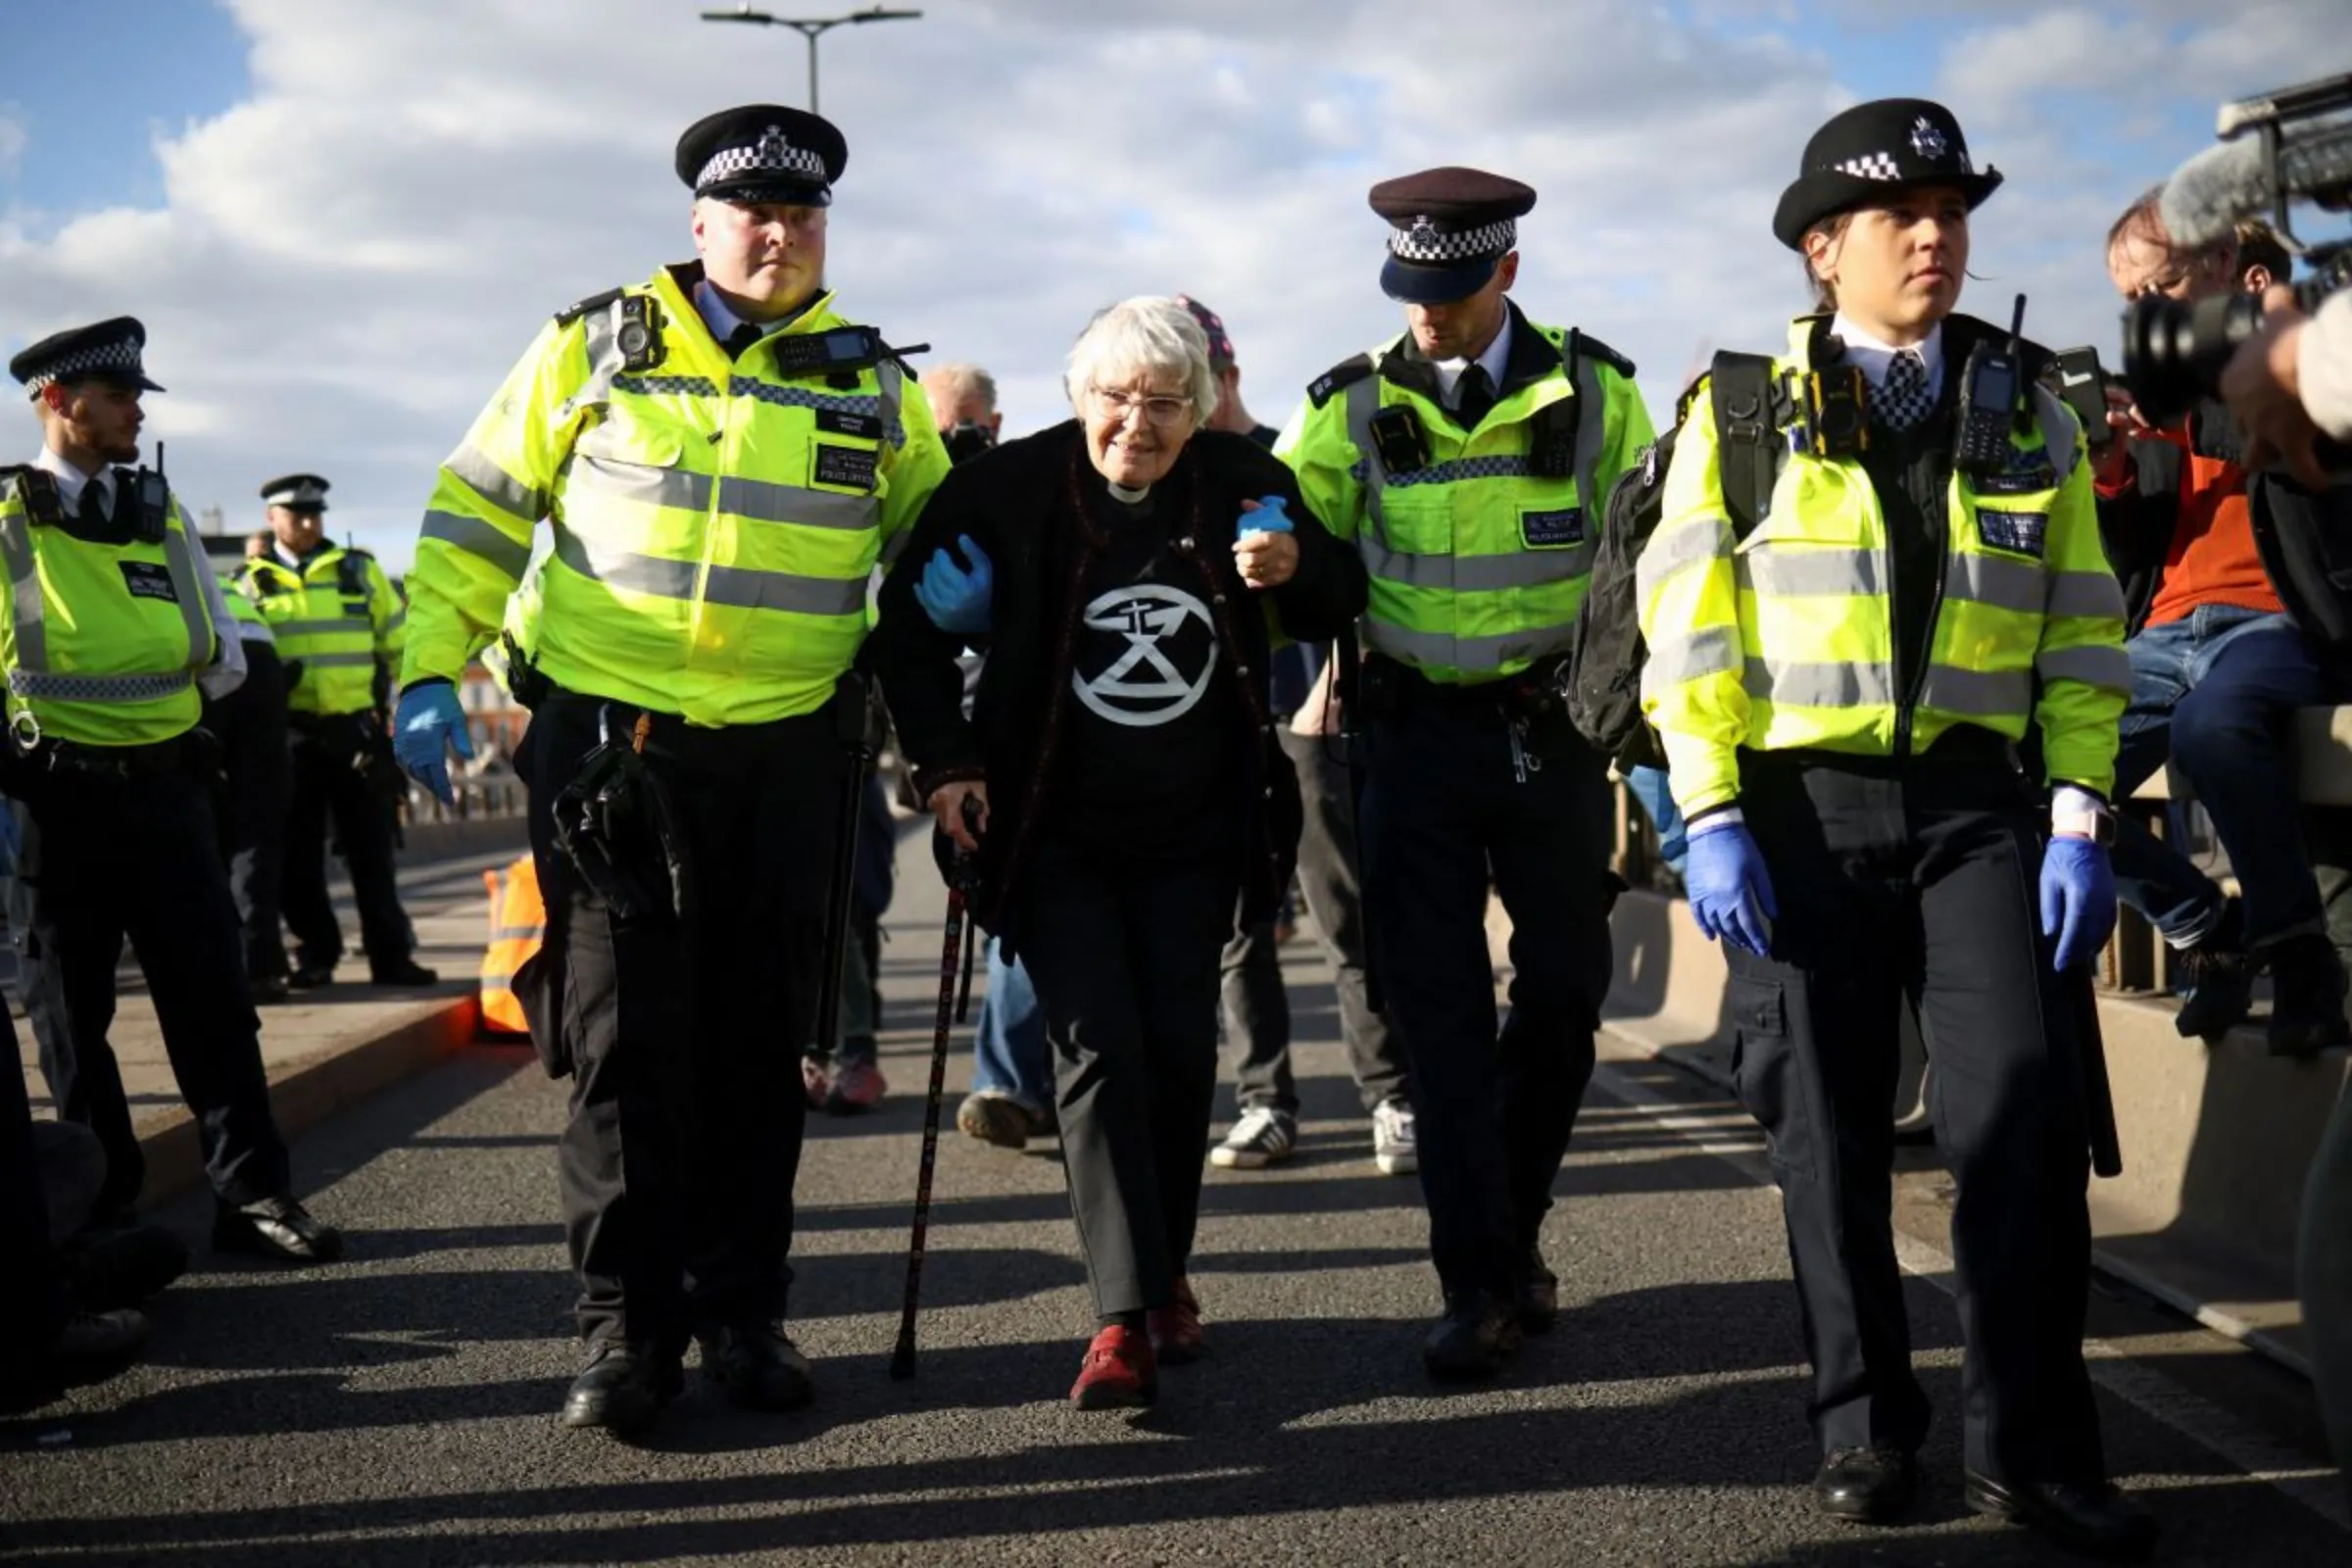 Police officers detain a demonstrator as people from 'Just Stop Oil' protest in London, Britain, October 2, 2022. REUTERS/Henry Nicholls